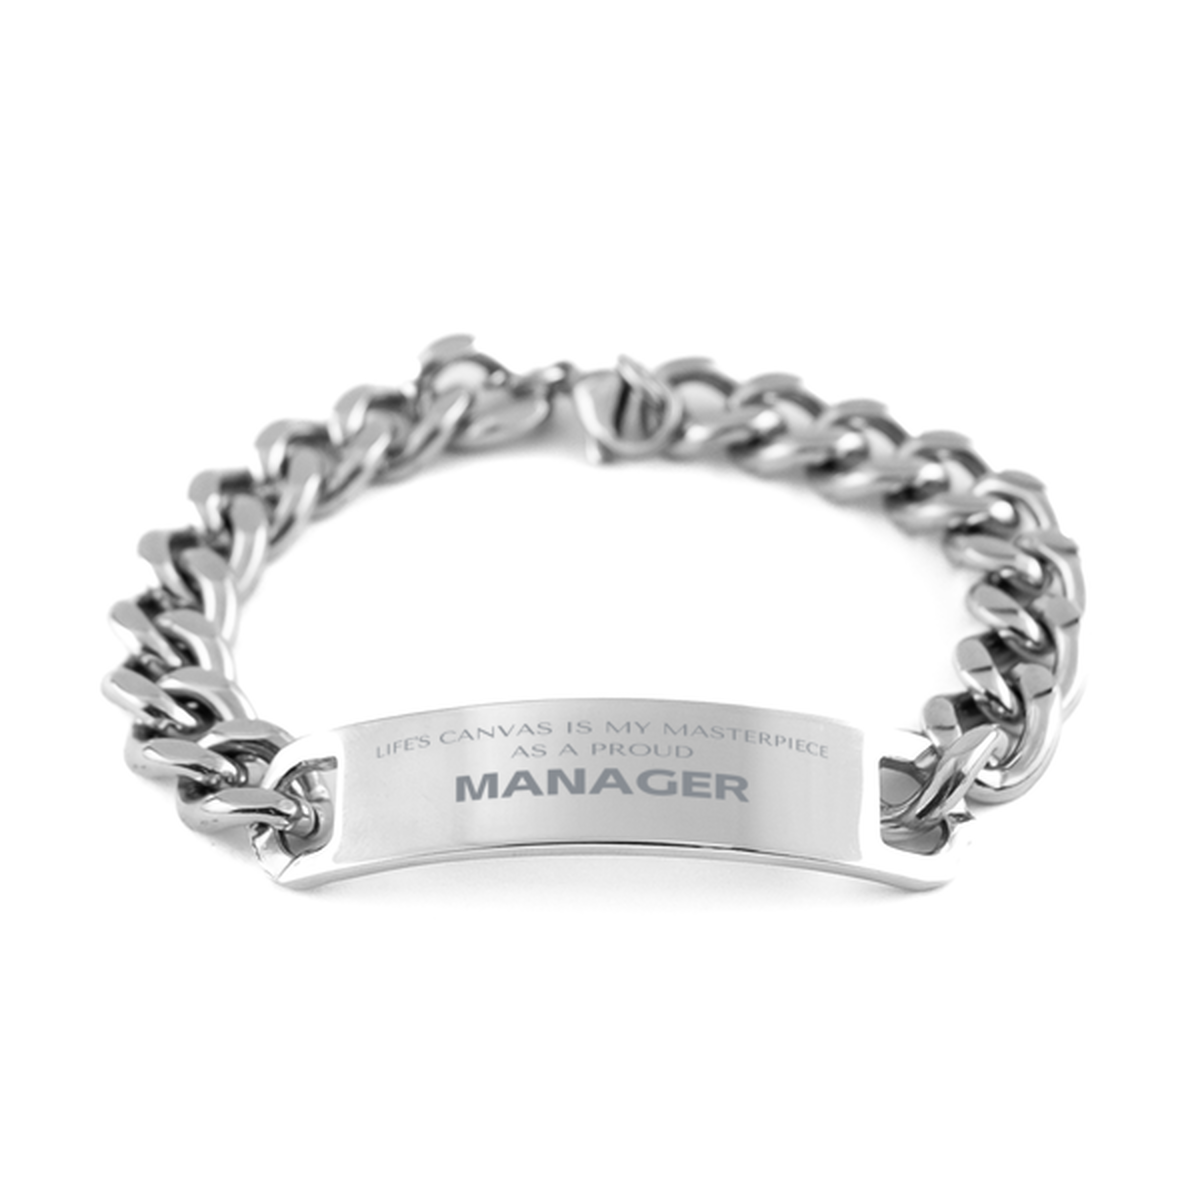 Proud Manager Gifts, Life's canvas is my masterpiece, Epic Birthday Christmas Unique Cuban Chain Stainless Steel Bracelet For Manager, Coworkers, Men, Women, Friends